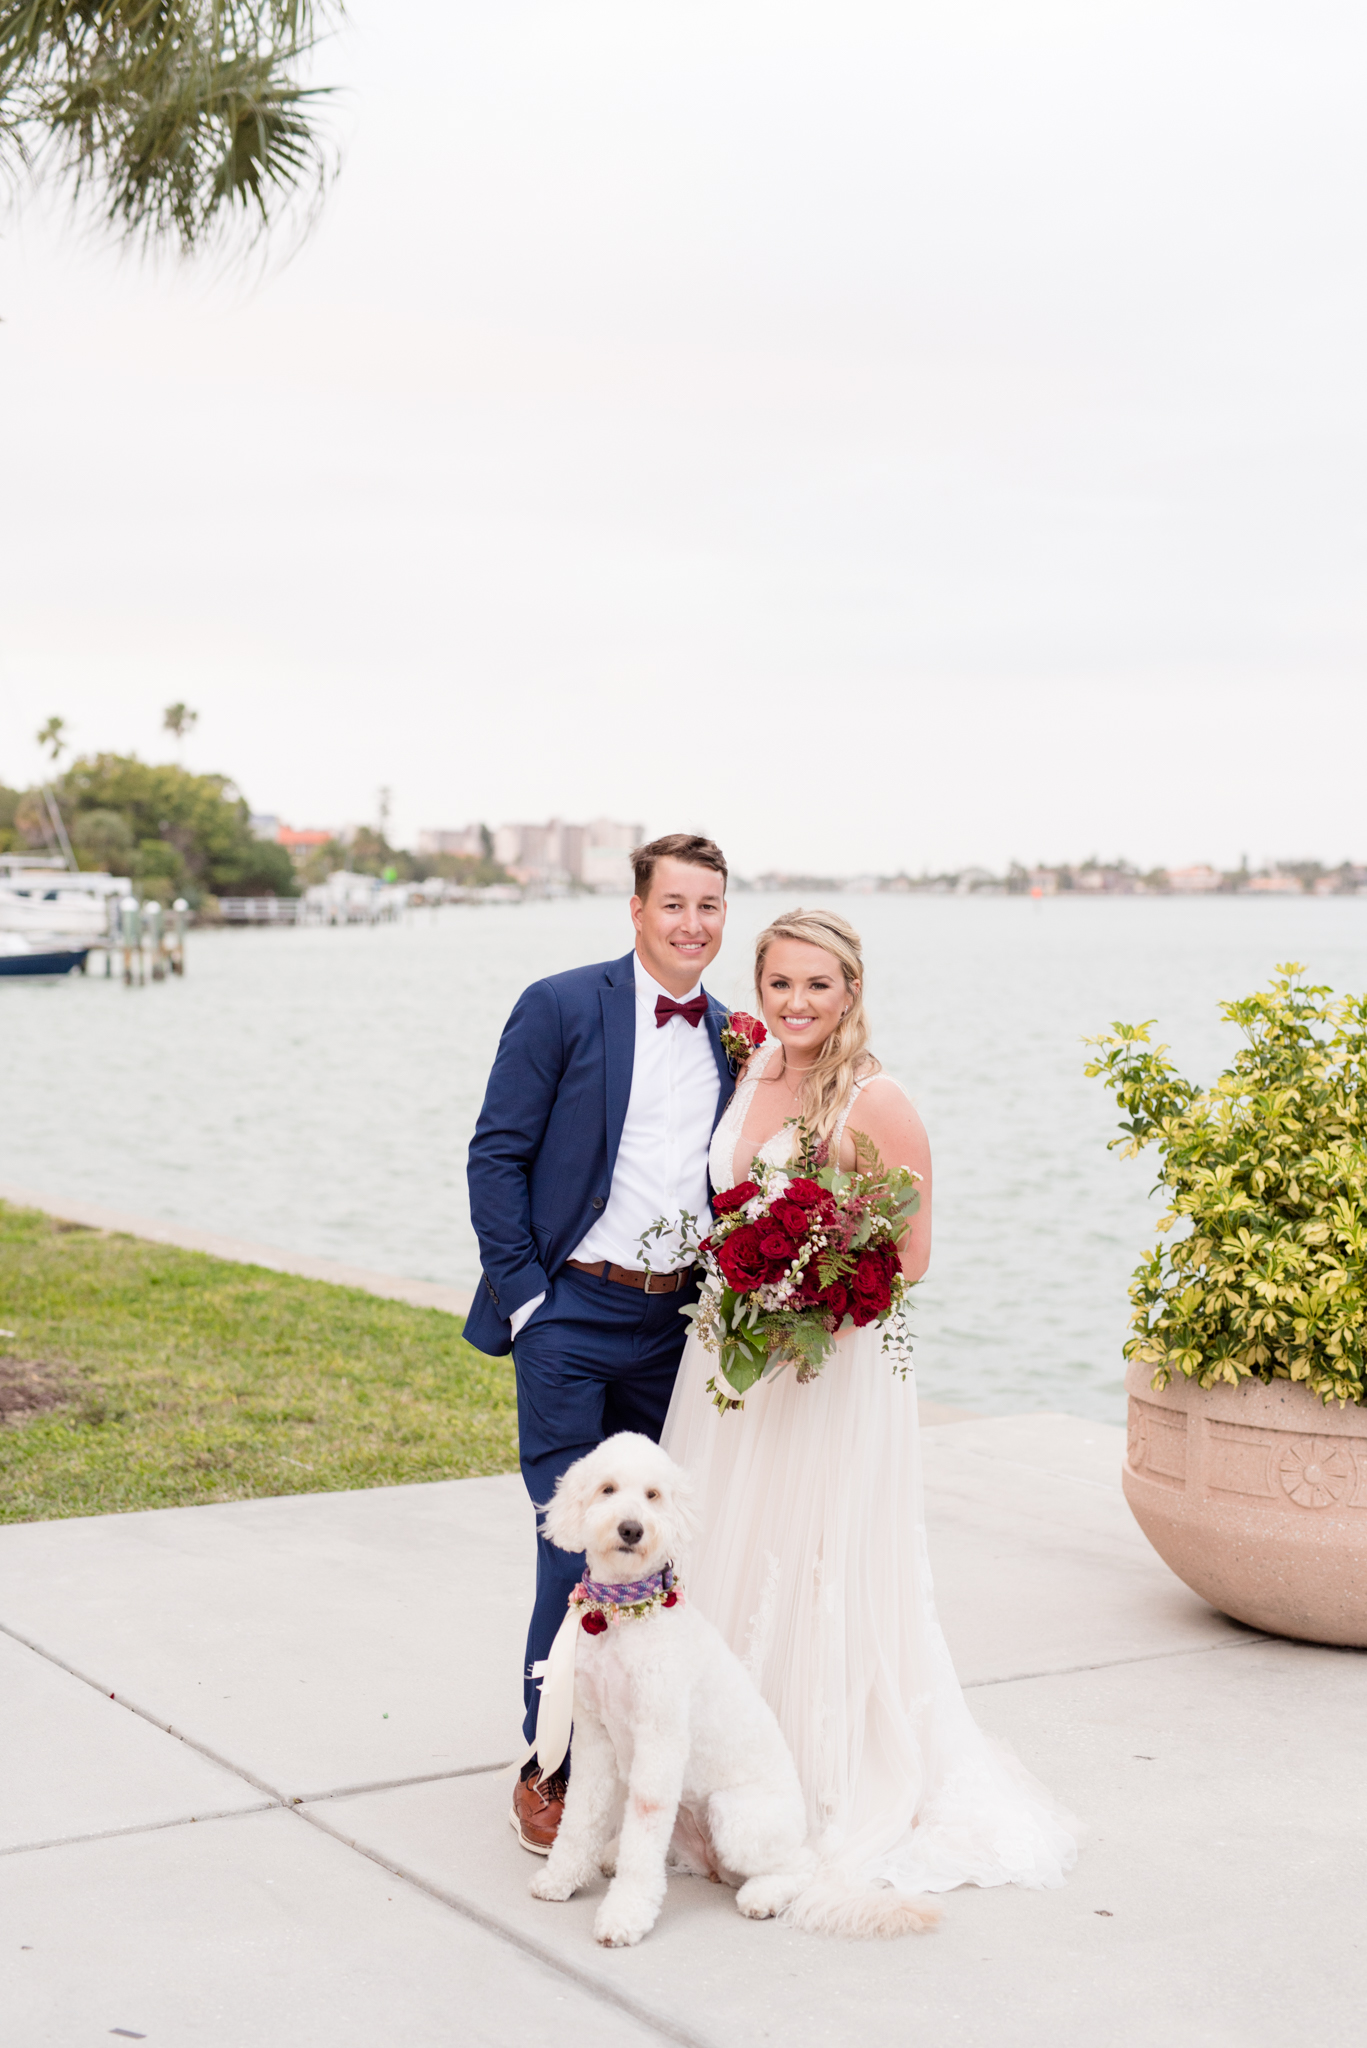 Bride and groom smile at camera with goldendoodle.